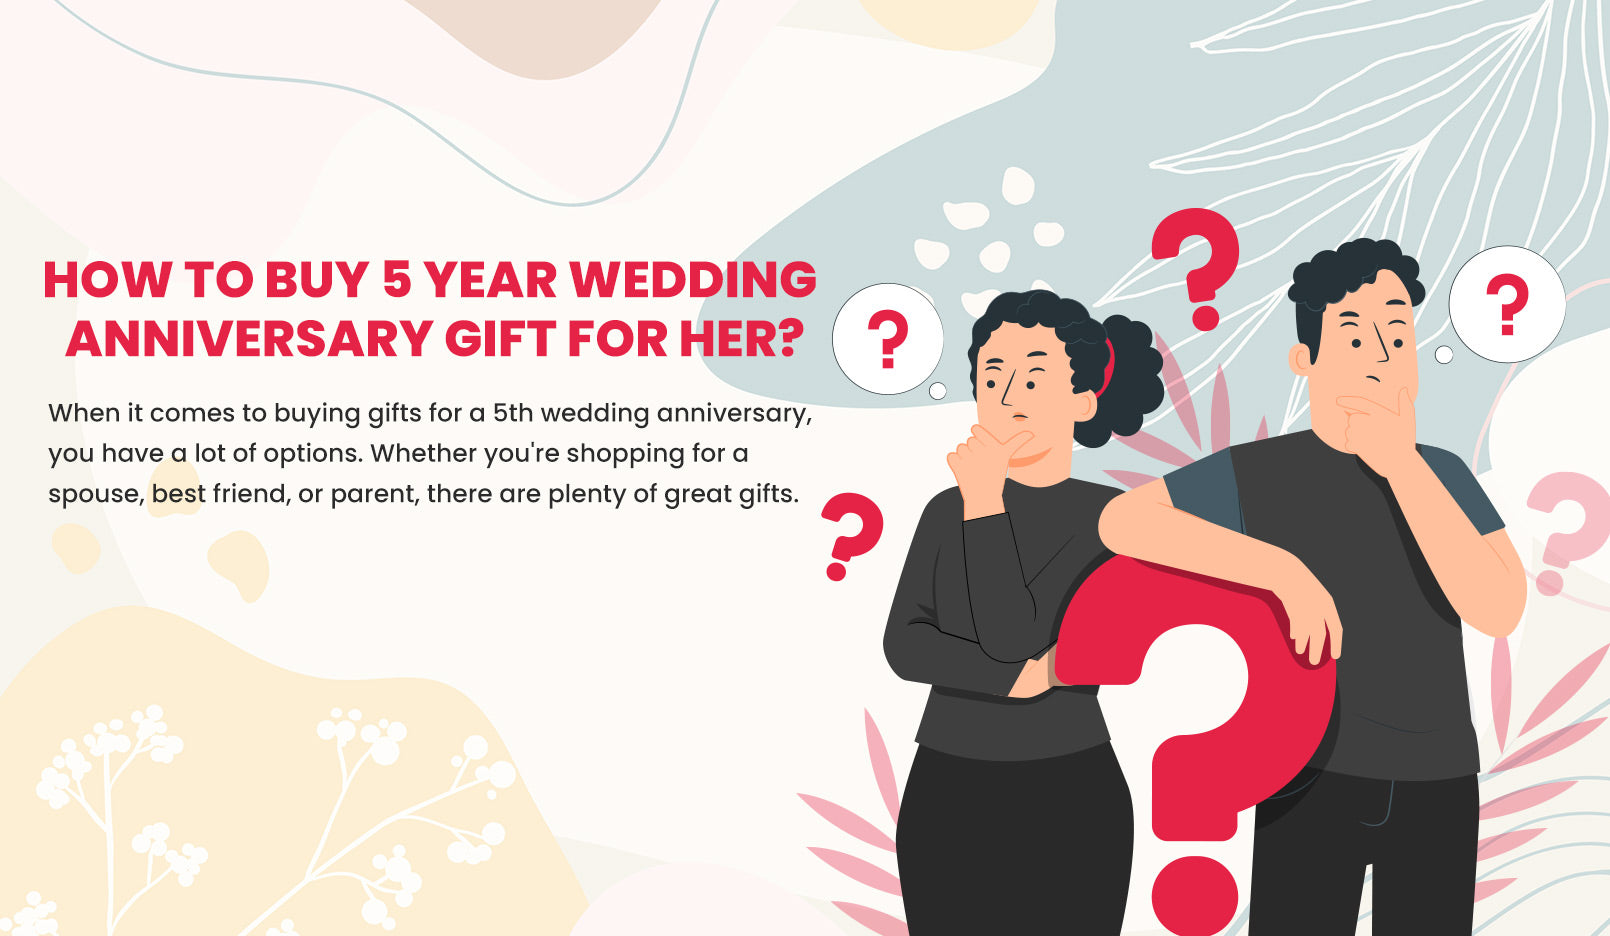 How to Buy 5th Wedding Anniversary Gifts for Her?